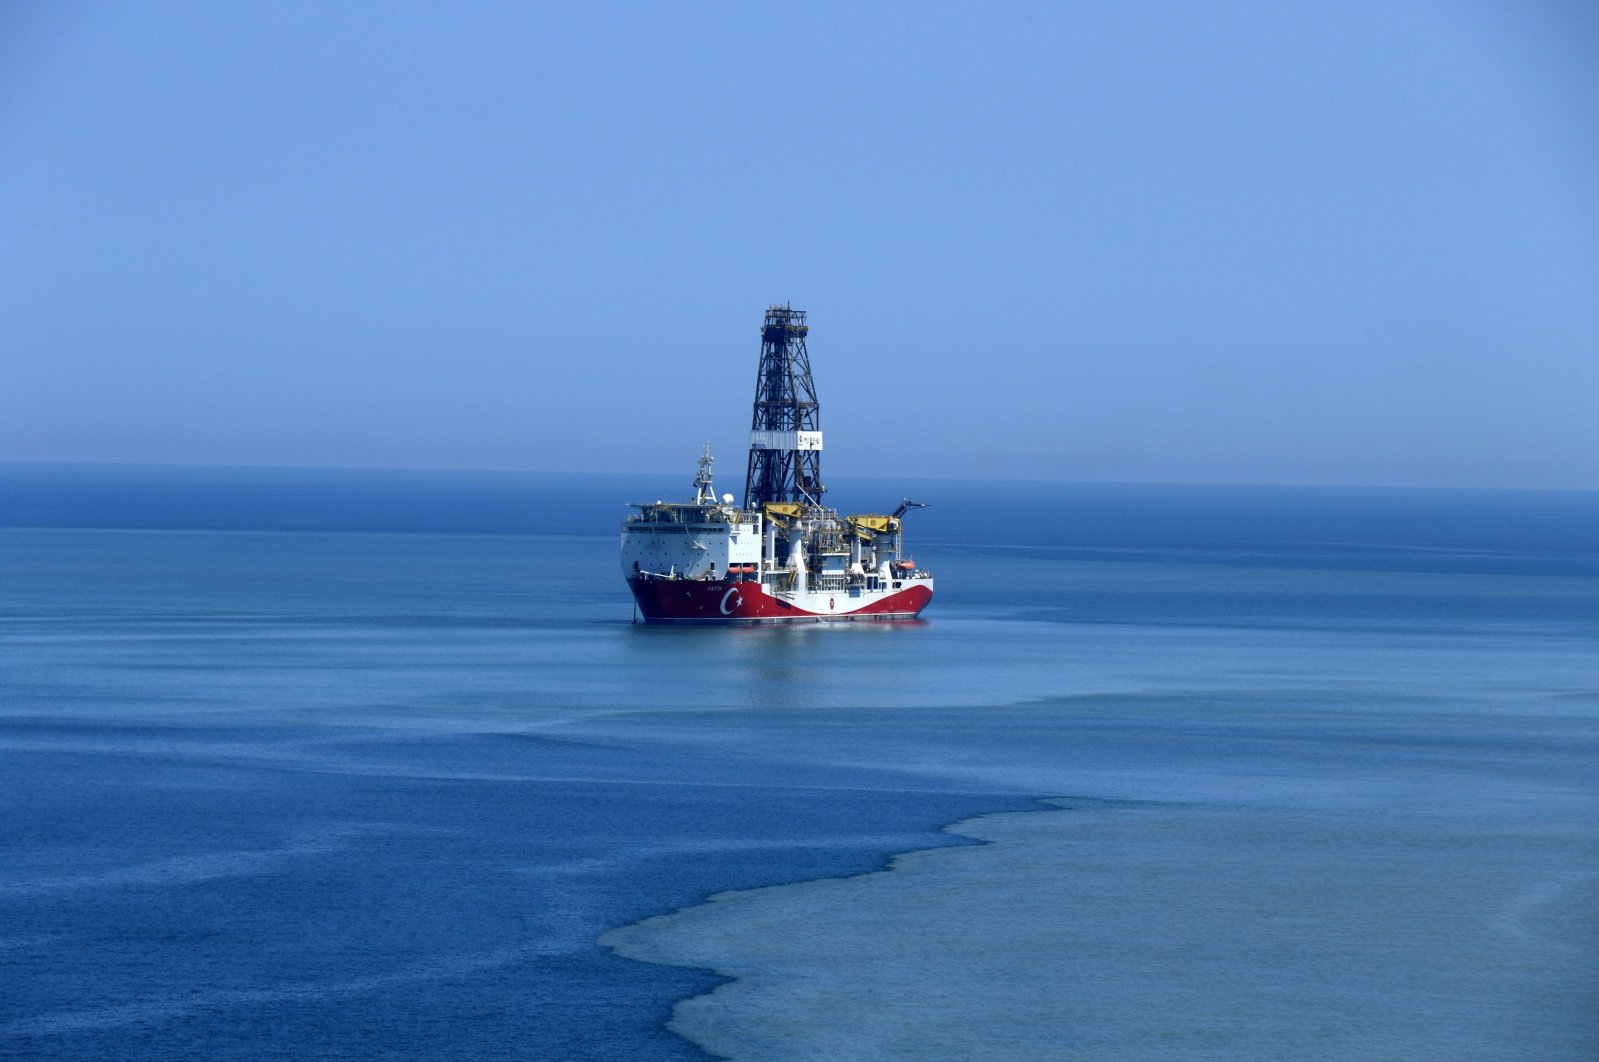 Ankara's first drillship is seen off the shores of the northern province of Zonguldak, Turkey, July 20, 2020. (IHA Photo)